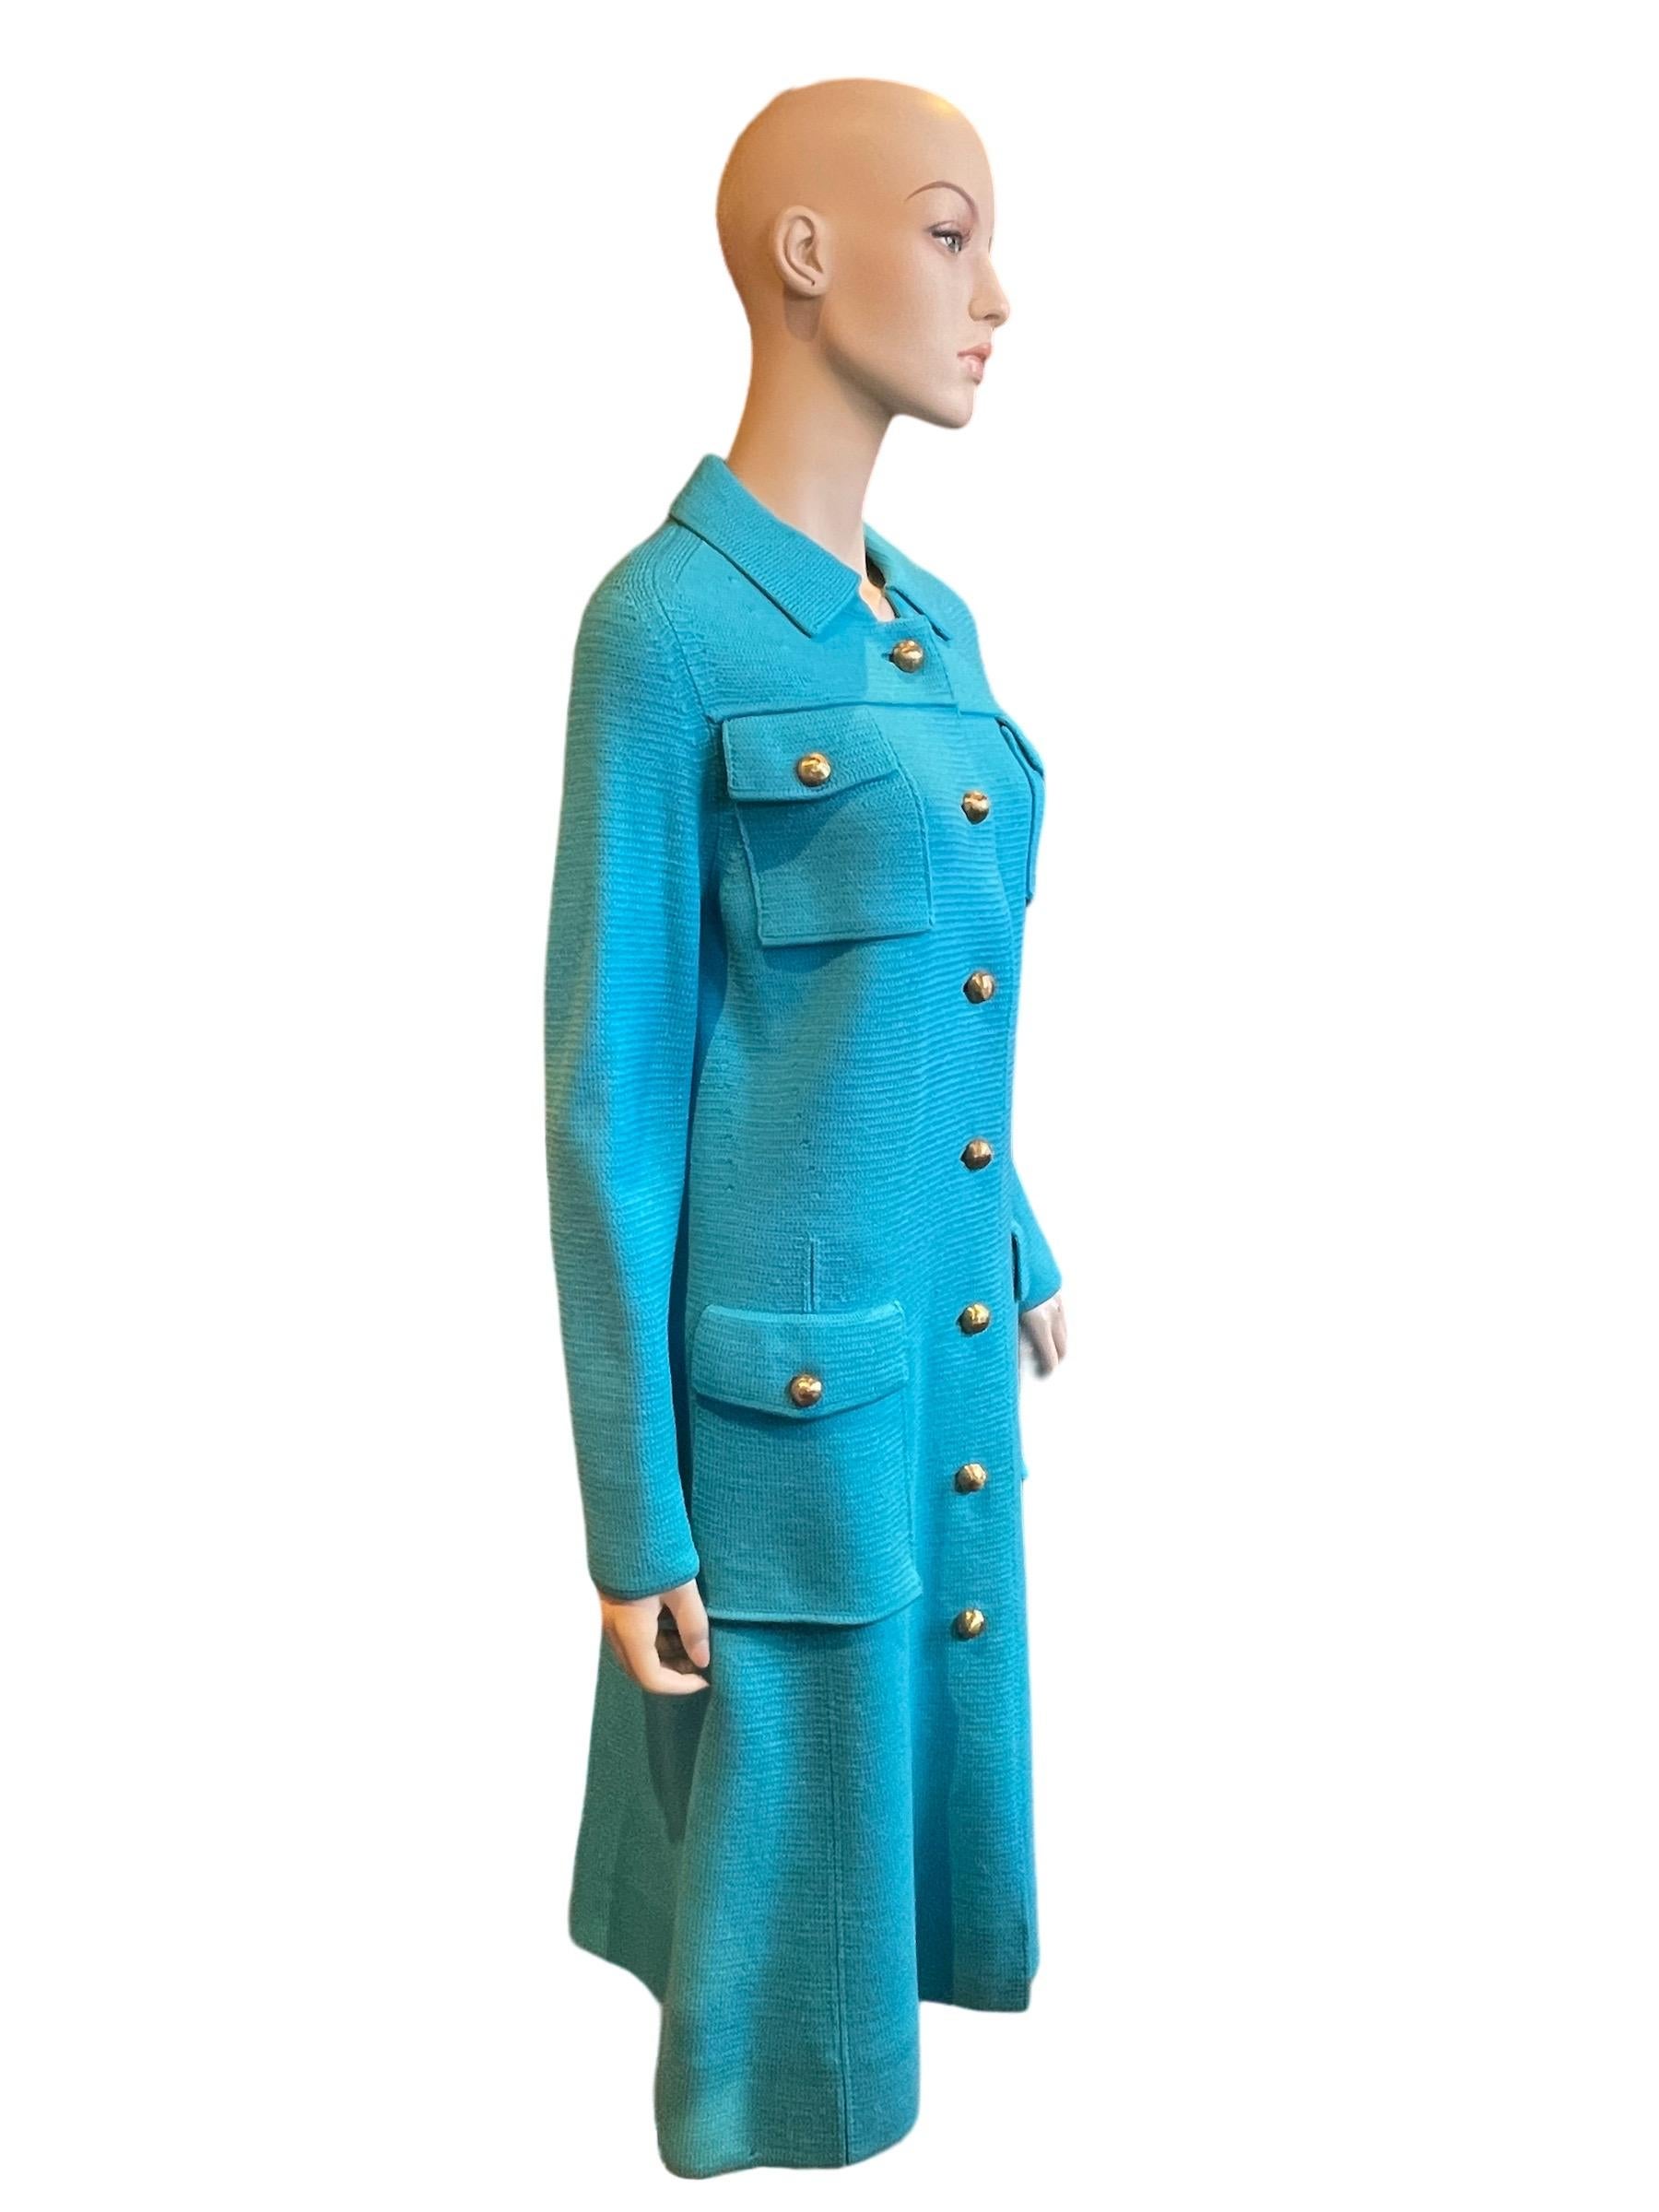 1960s Albertina Roma Turquoise Long Sweater Coat With Gold Buttons

An amazing long sweater coat, with gold buttons. In excellent condition! 

